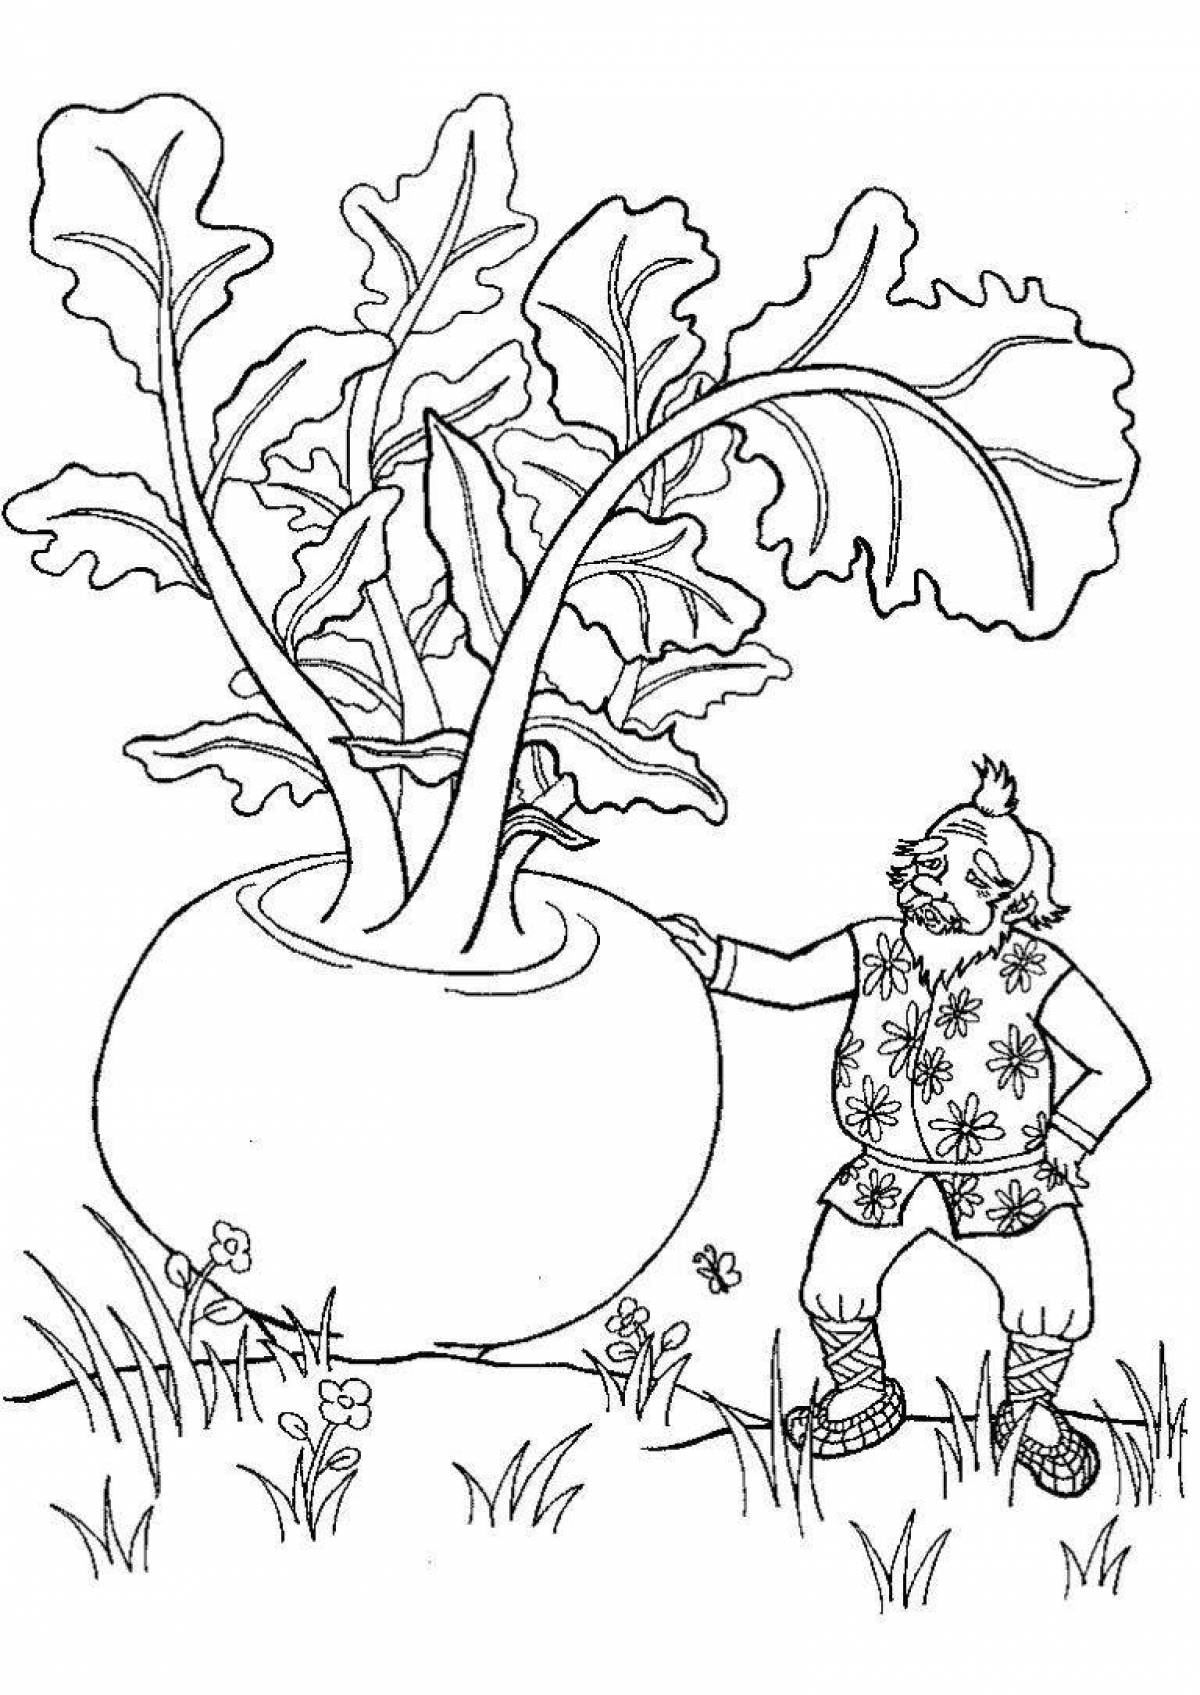 An interesting turnip coloring book for kids